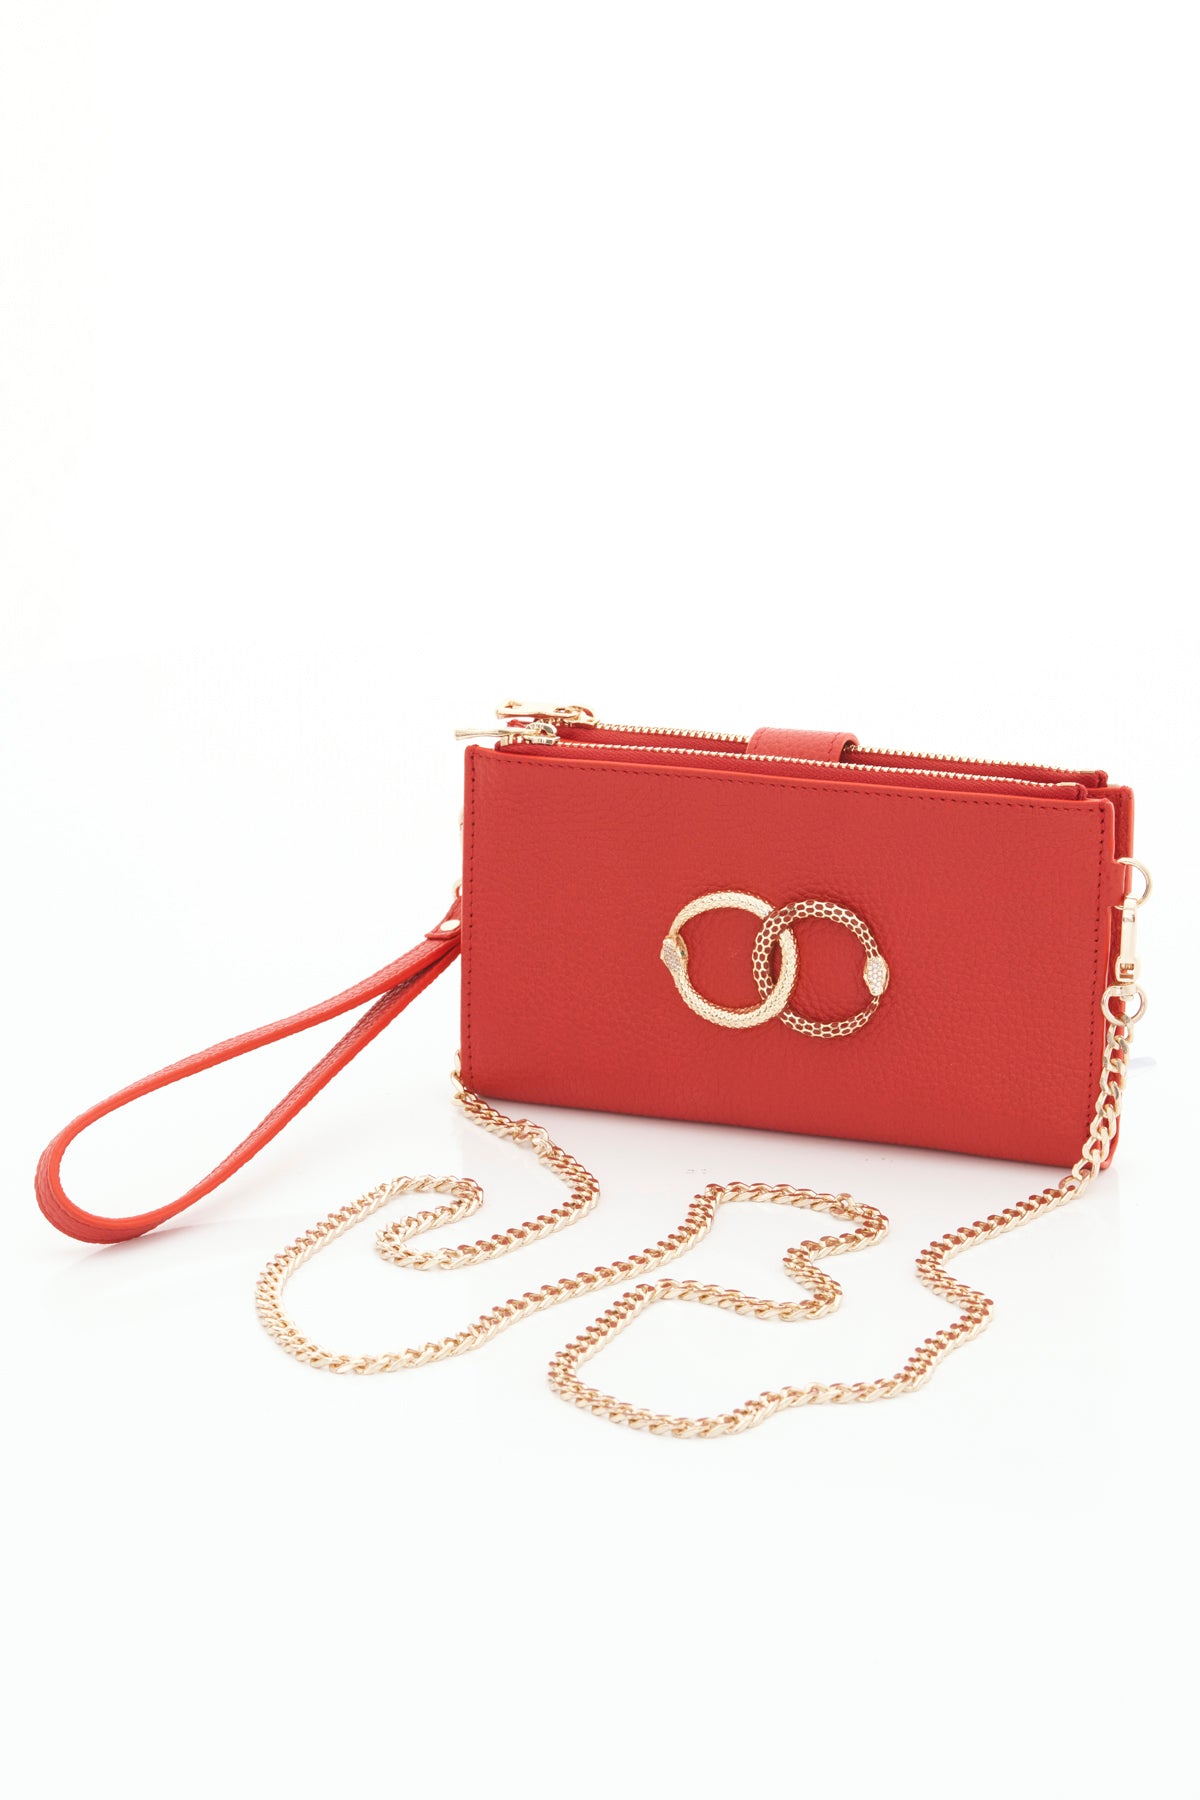 red ouroboros genuine leather women's crossbody bag front